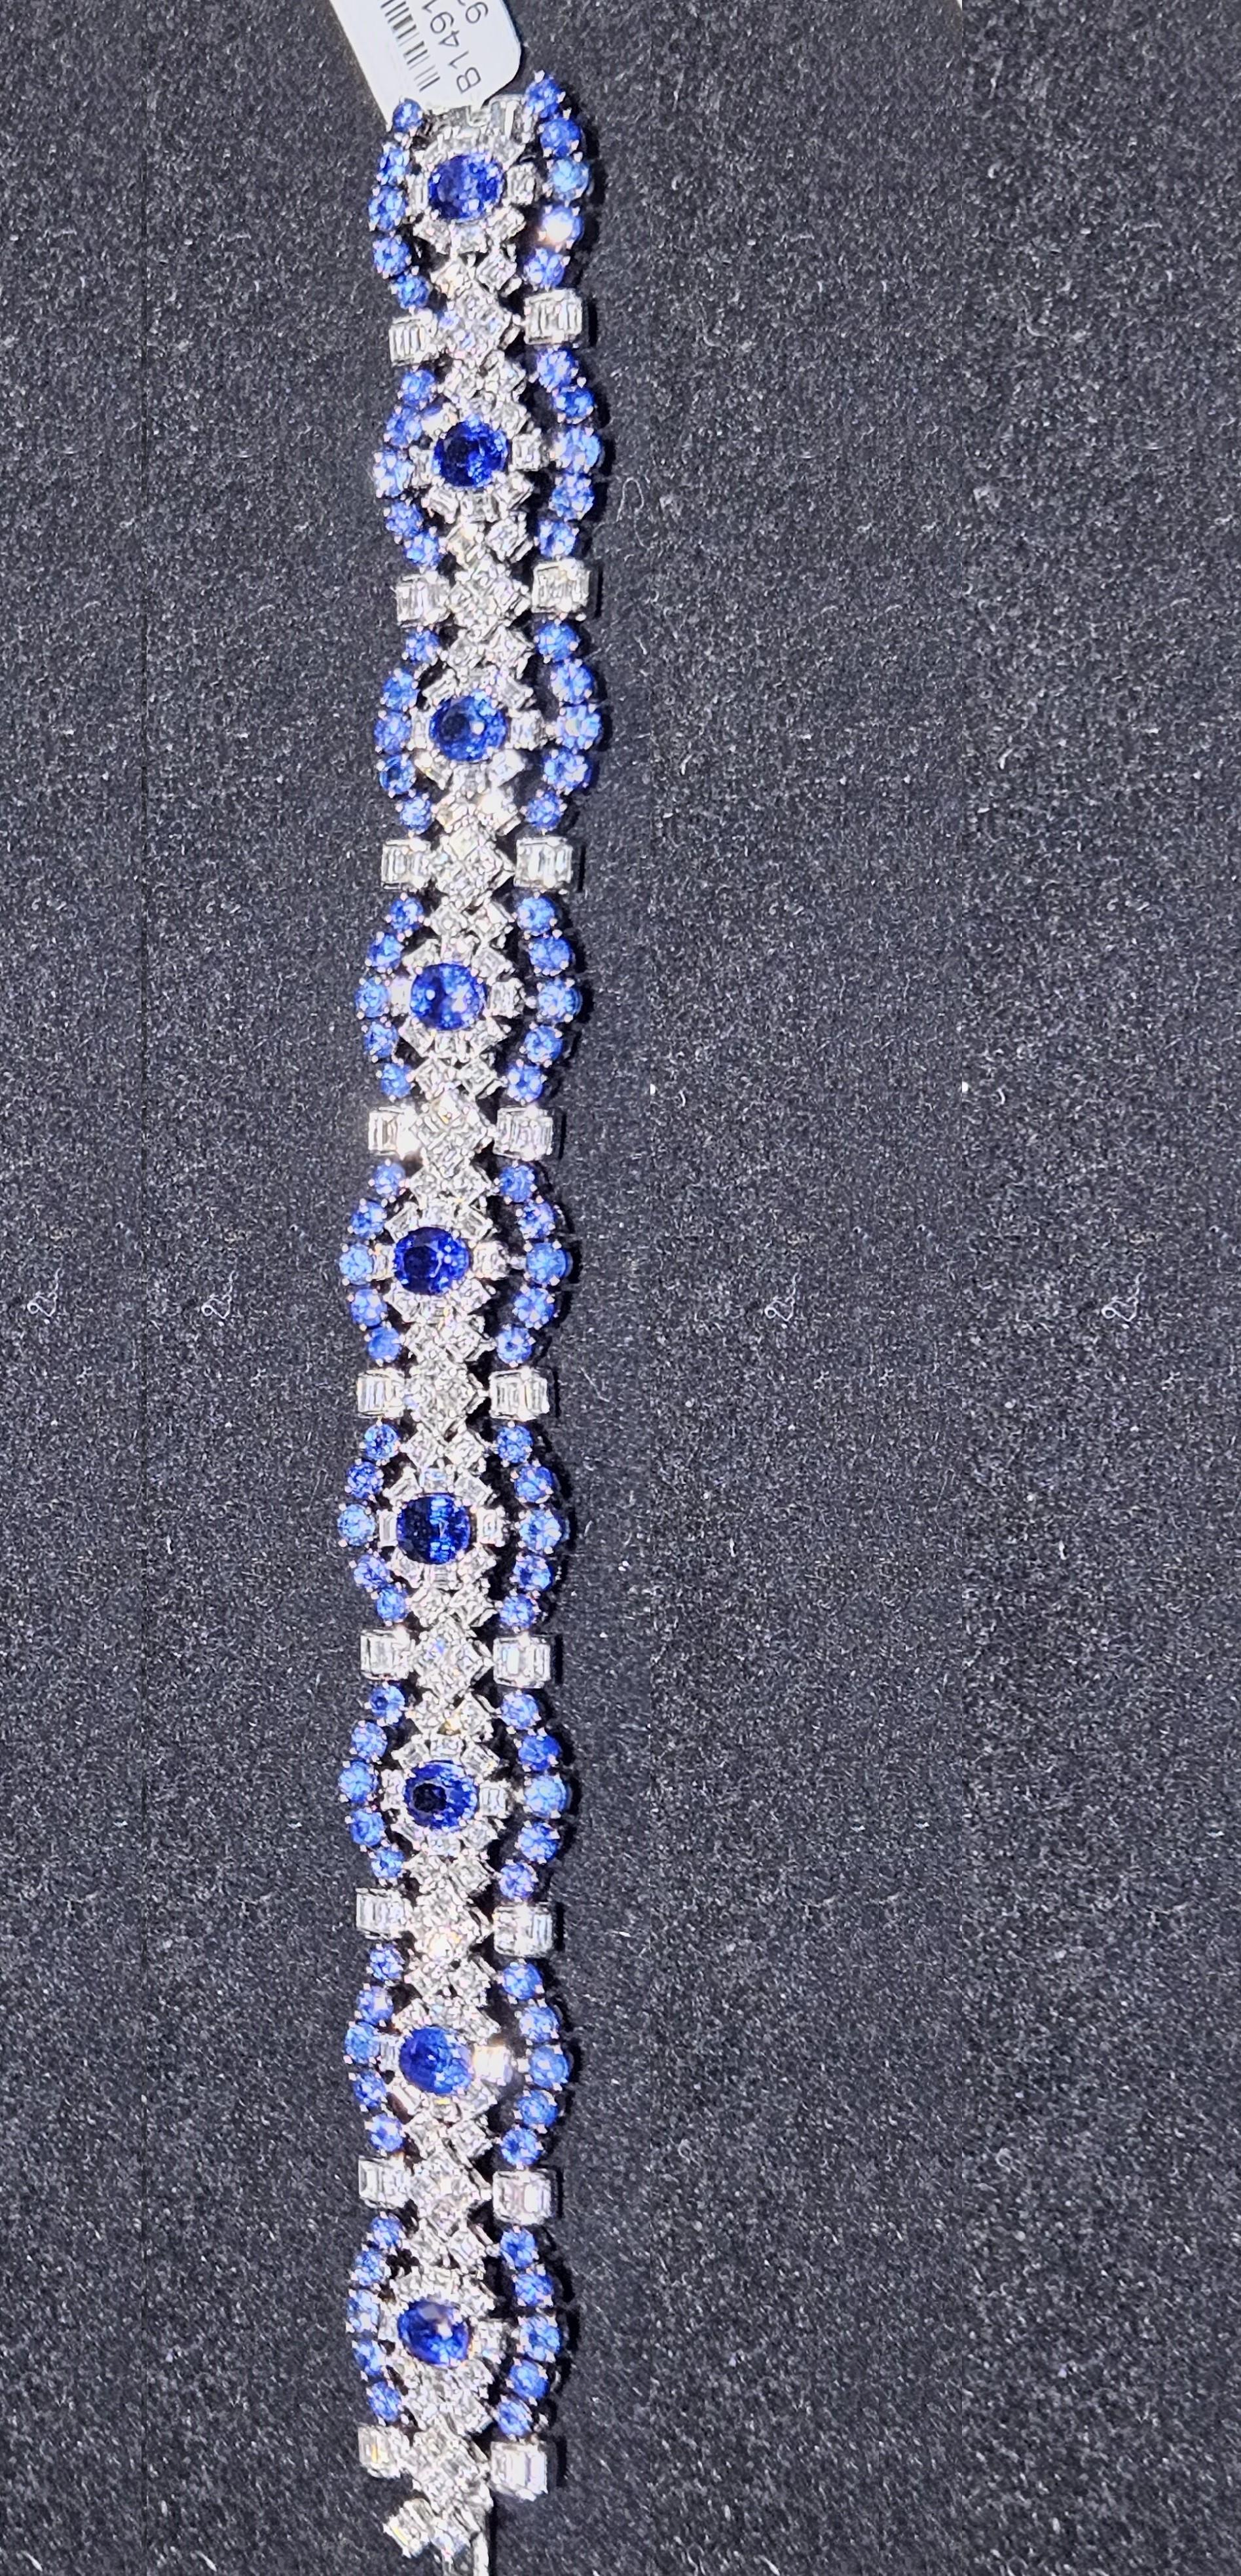 The Following Item we are offering is a Rare Important Spectacular and Brilliant 18KT Gold Large Gorgeous Fancy Ceylon Blue Sapphire Diamond Bracelet. Bracelet consists of Rare Fine Magnificent Glittering Blue Sapphires. T.C.W. approx 20CTS!!! This